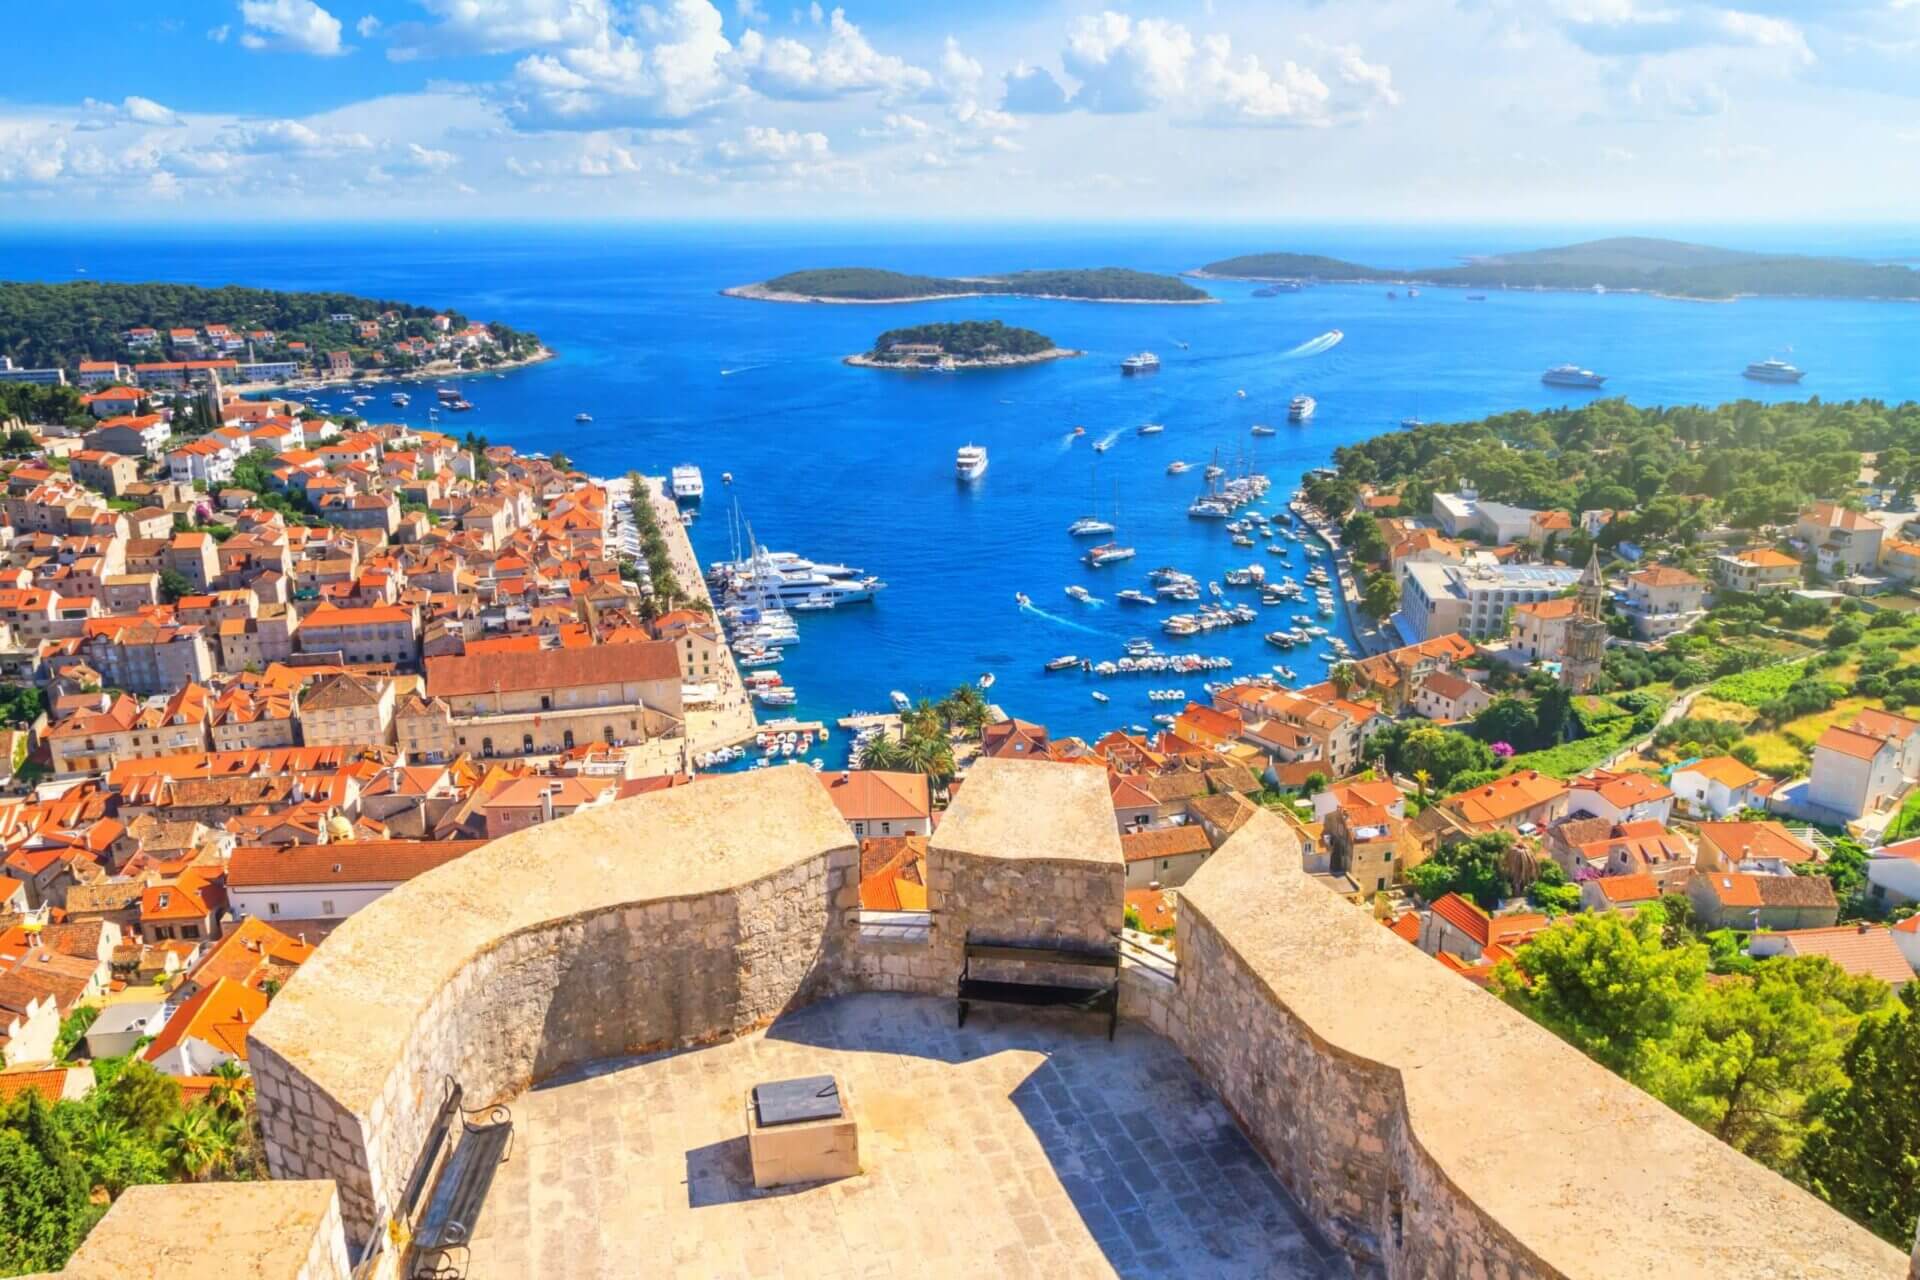 coastal-summer-landscape-top-view-of-the-city-harbour-and-marina-of-the-town-of-hvar-from-the-fortress-on-the-island-of-hvar-the-adriatic-coast-of-croatia-stockpack-istock